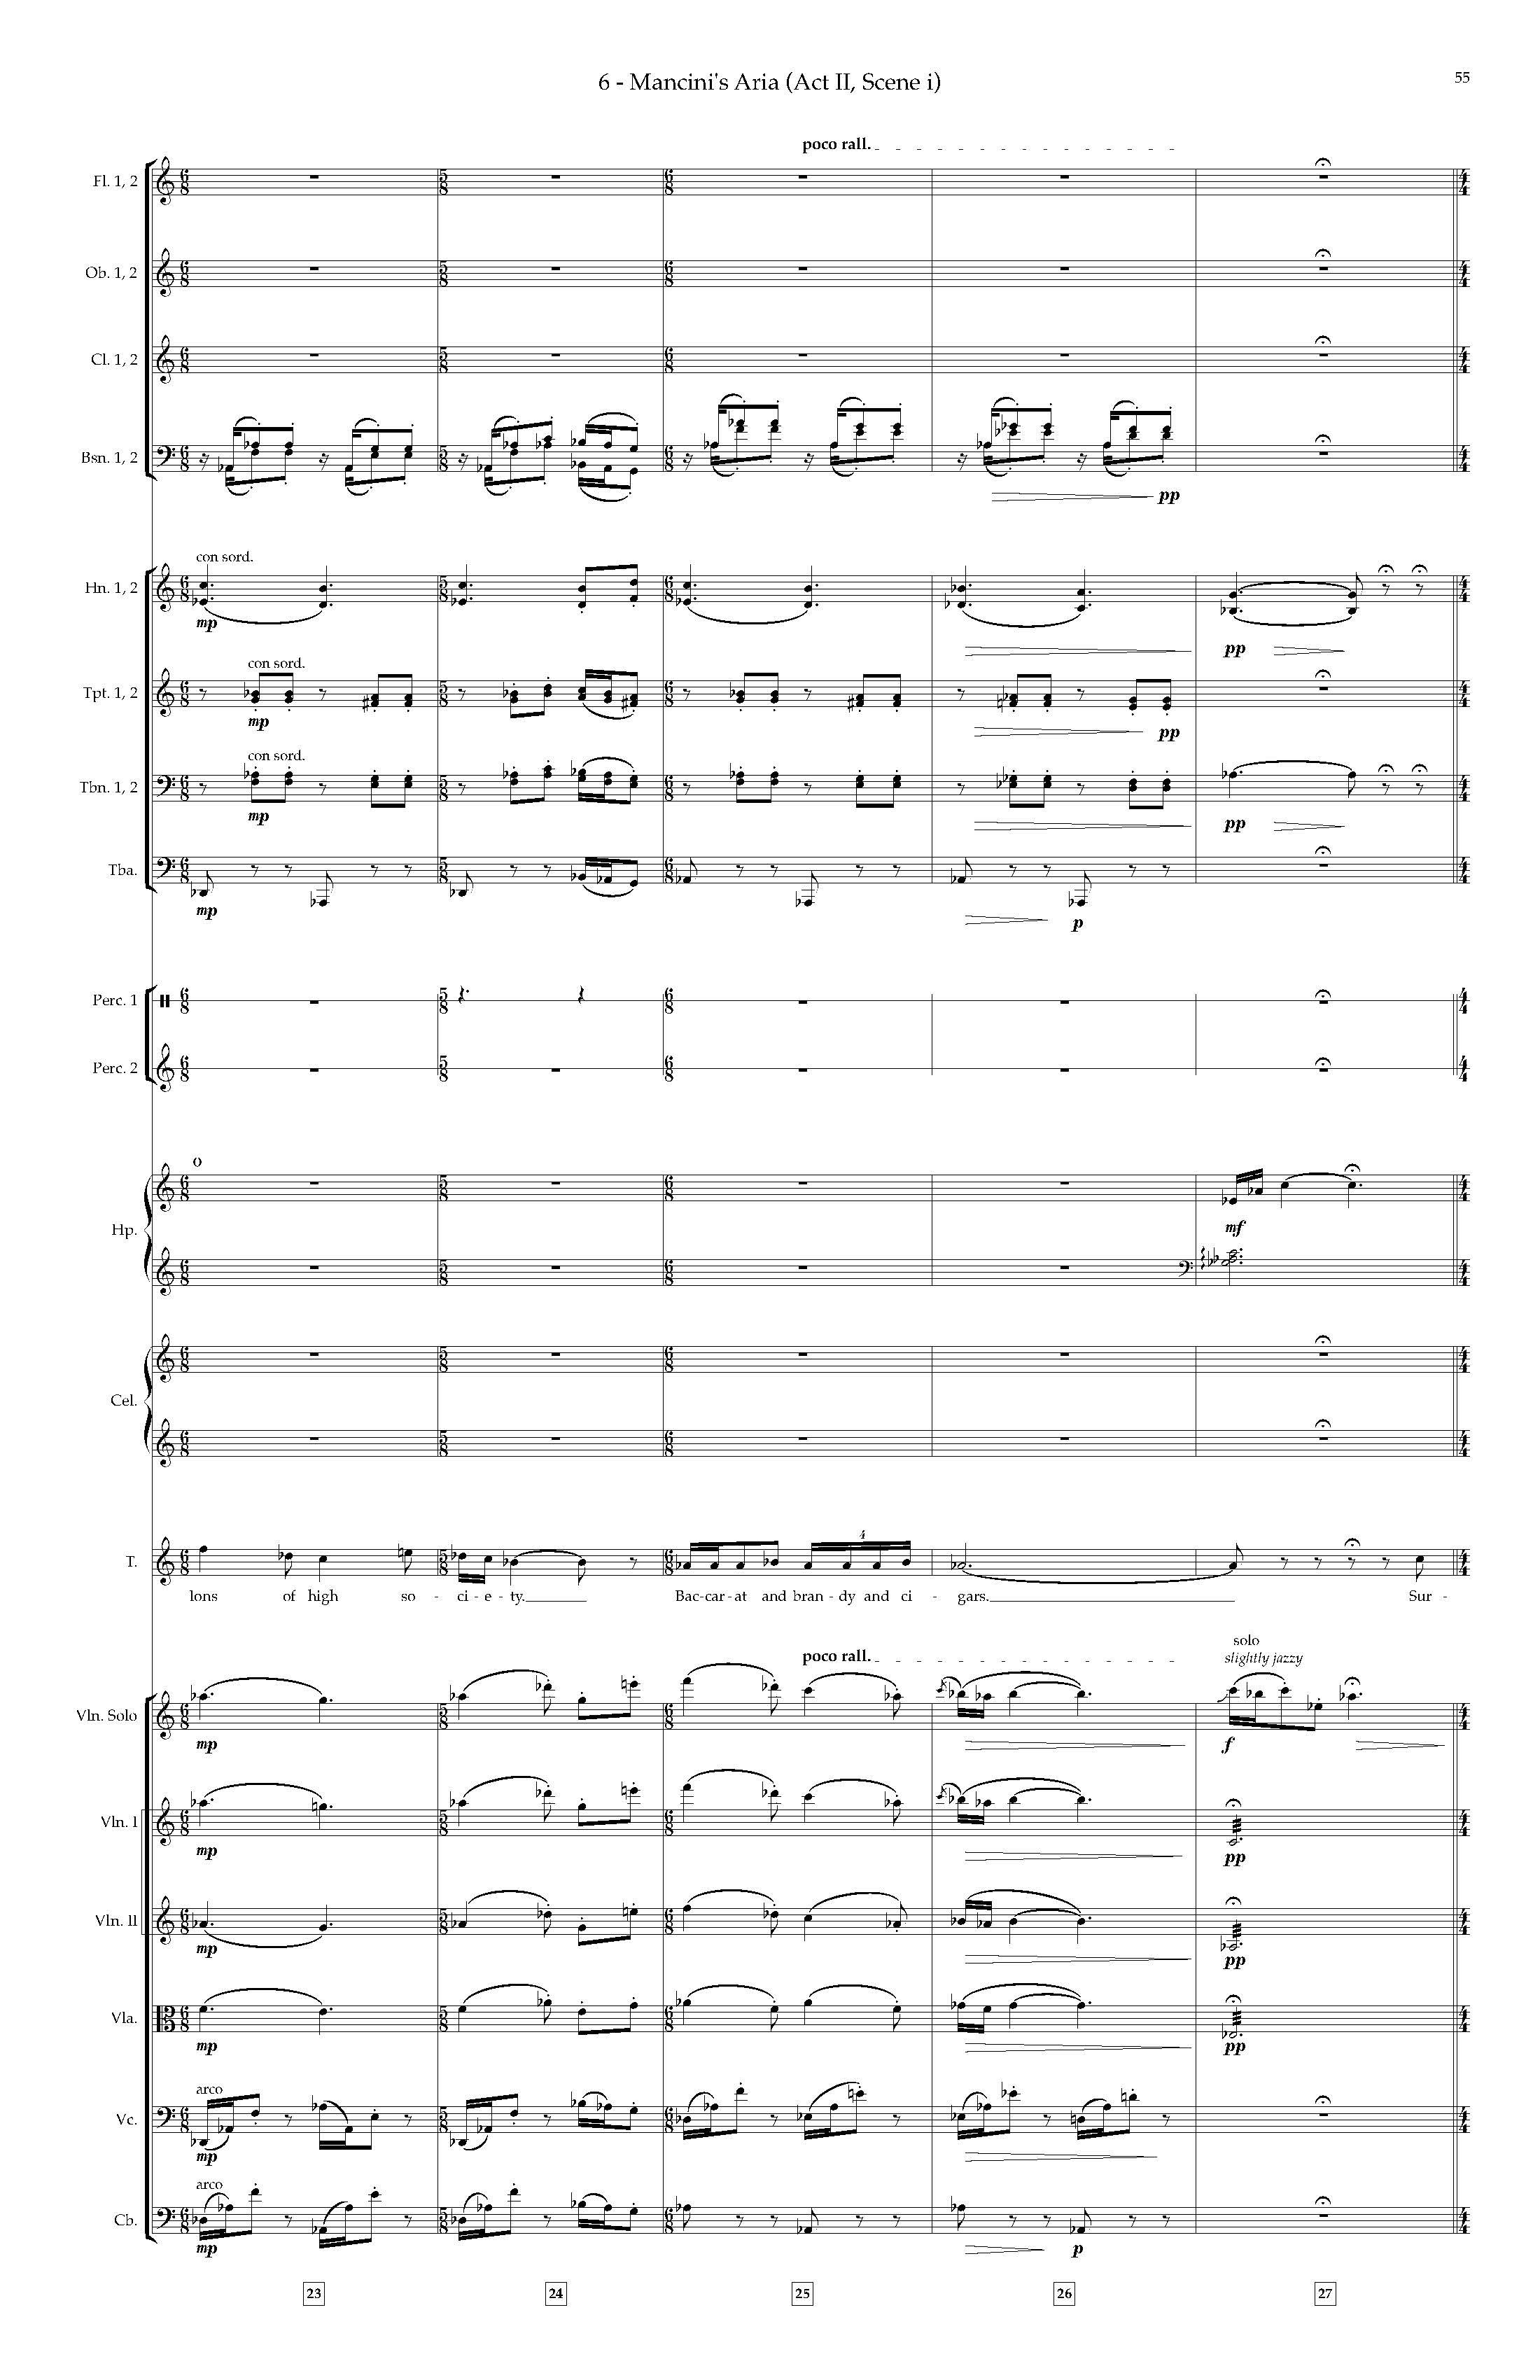 Arias and Interludes from HWGS - Complete Score_Page_61.jpg